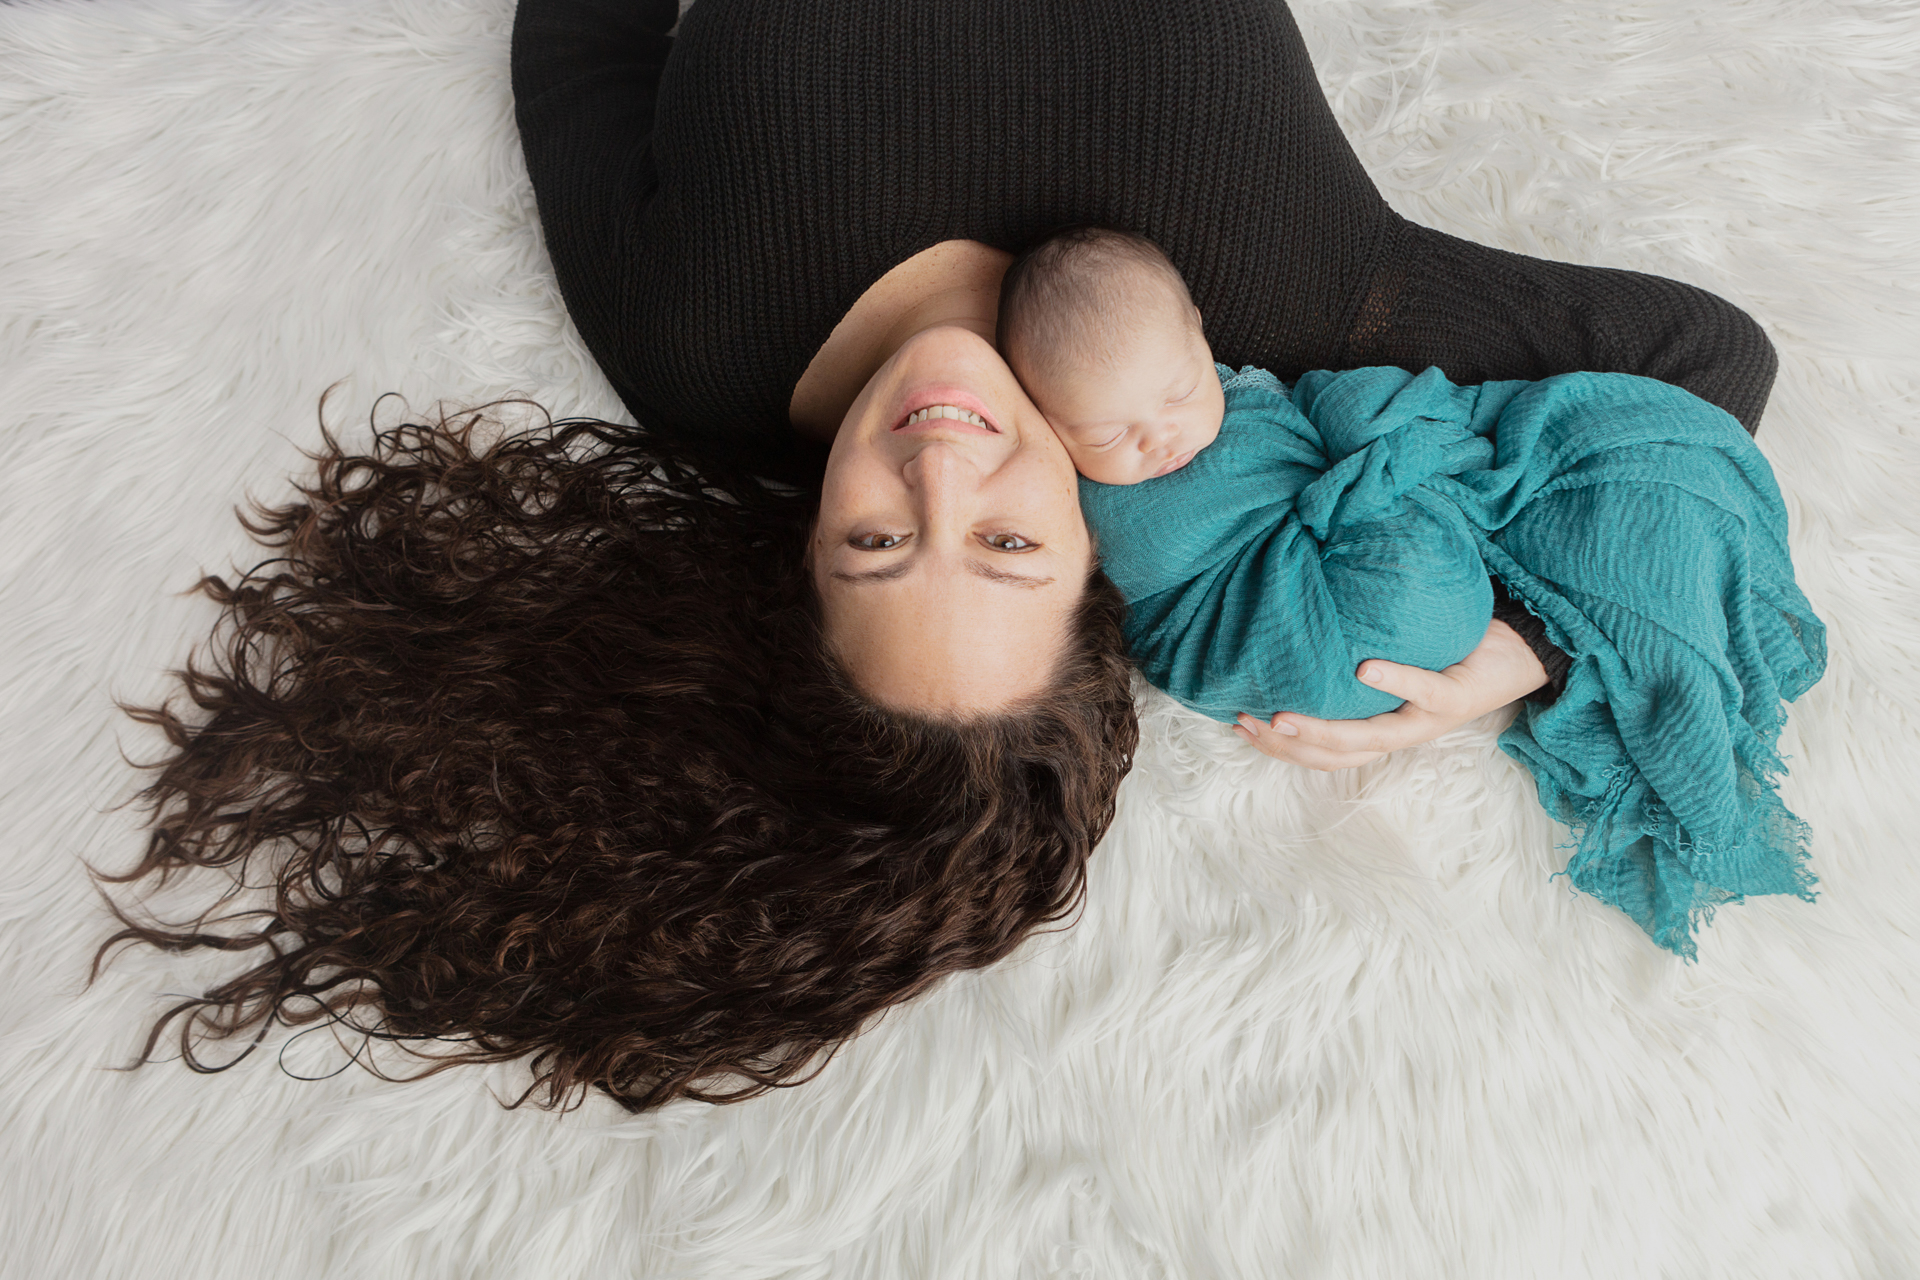 simple and classic portrait of a new mother with long and wavy mermaid hair holding her new baby boy while laying on a white flokati rug